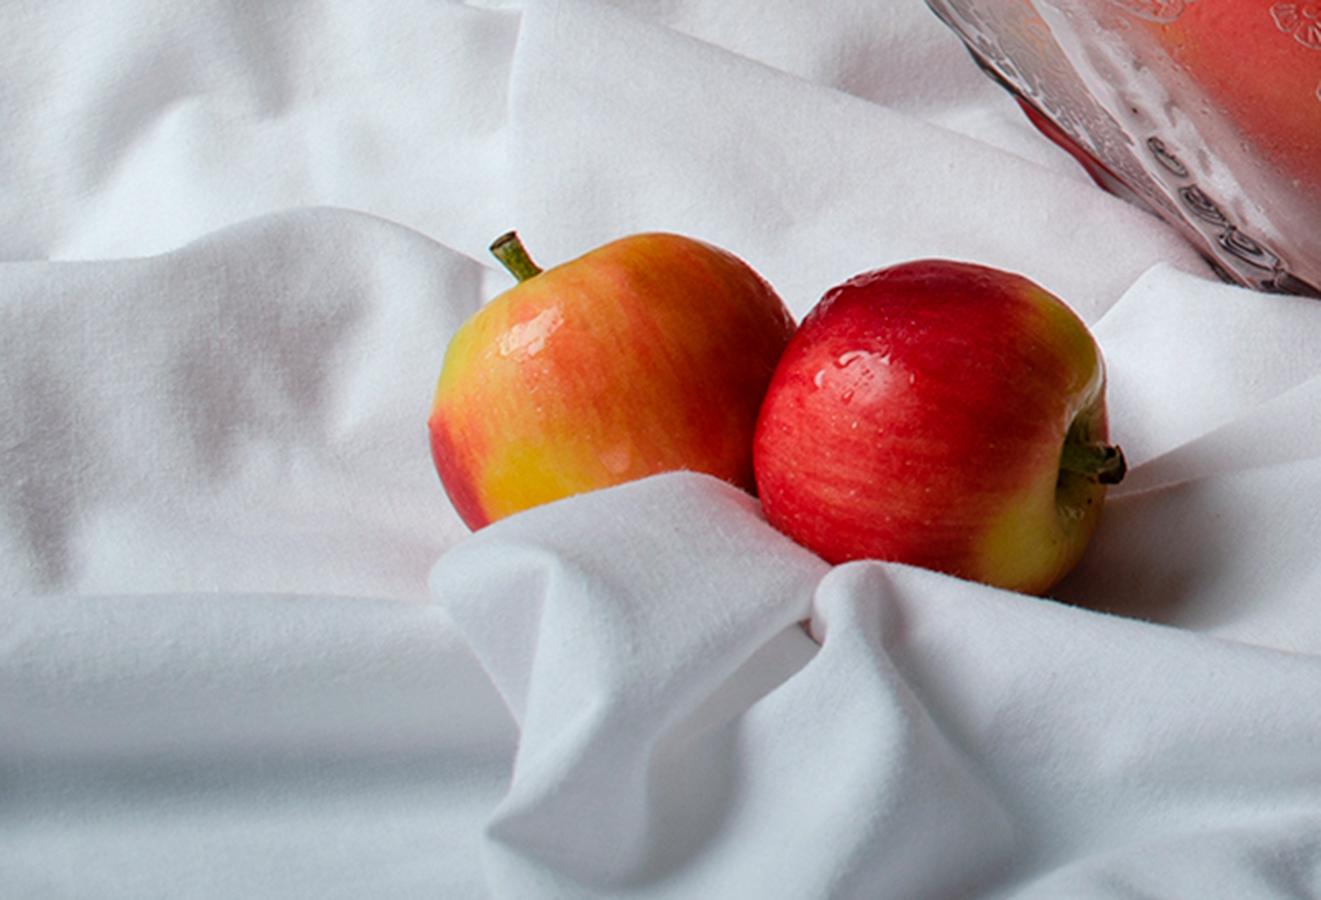 Manzanas II. From The Bodegones  still life color photography series - Contemporary Photograph by Dora Franco